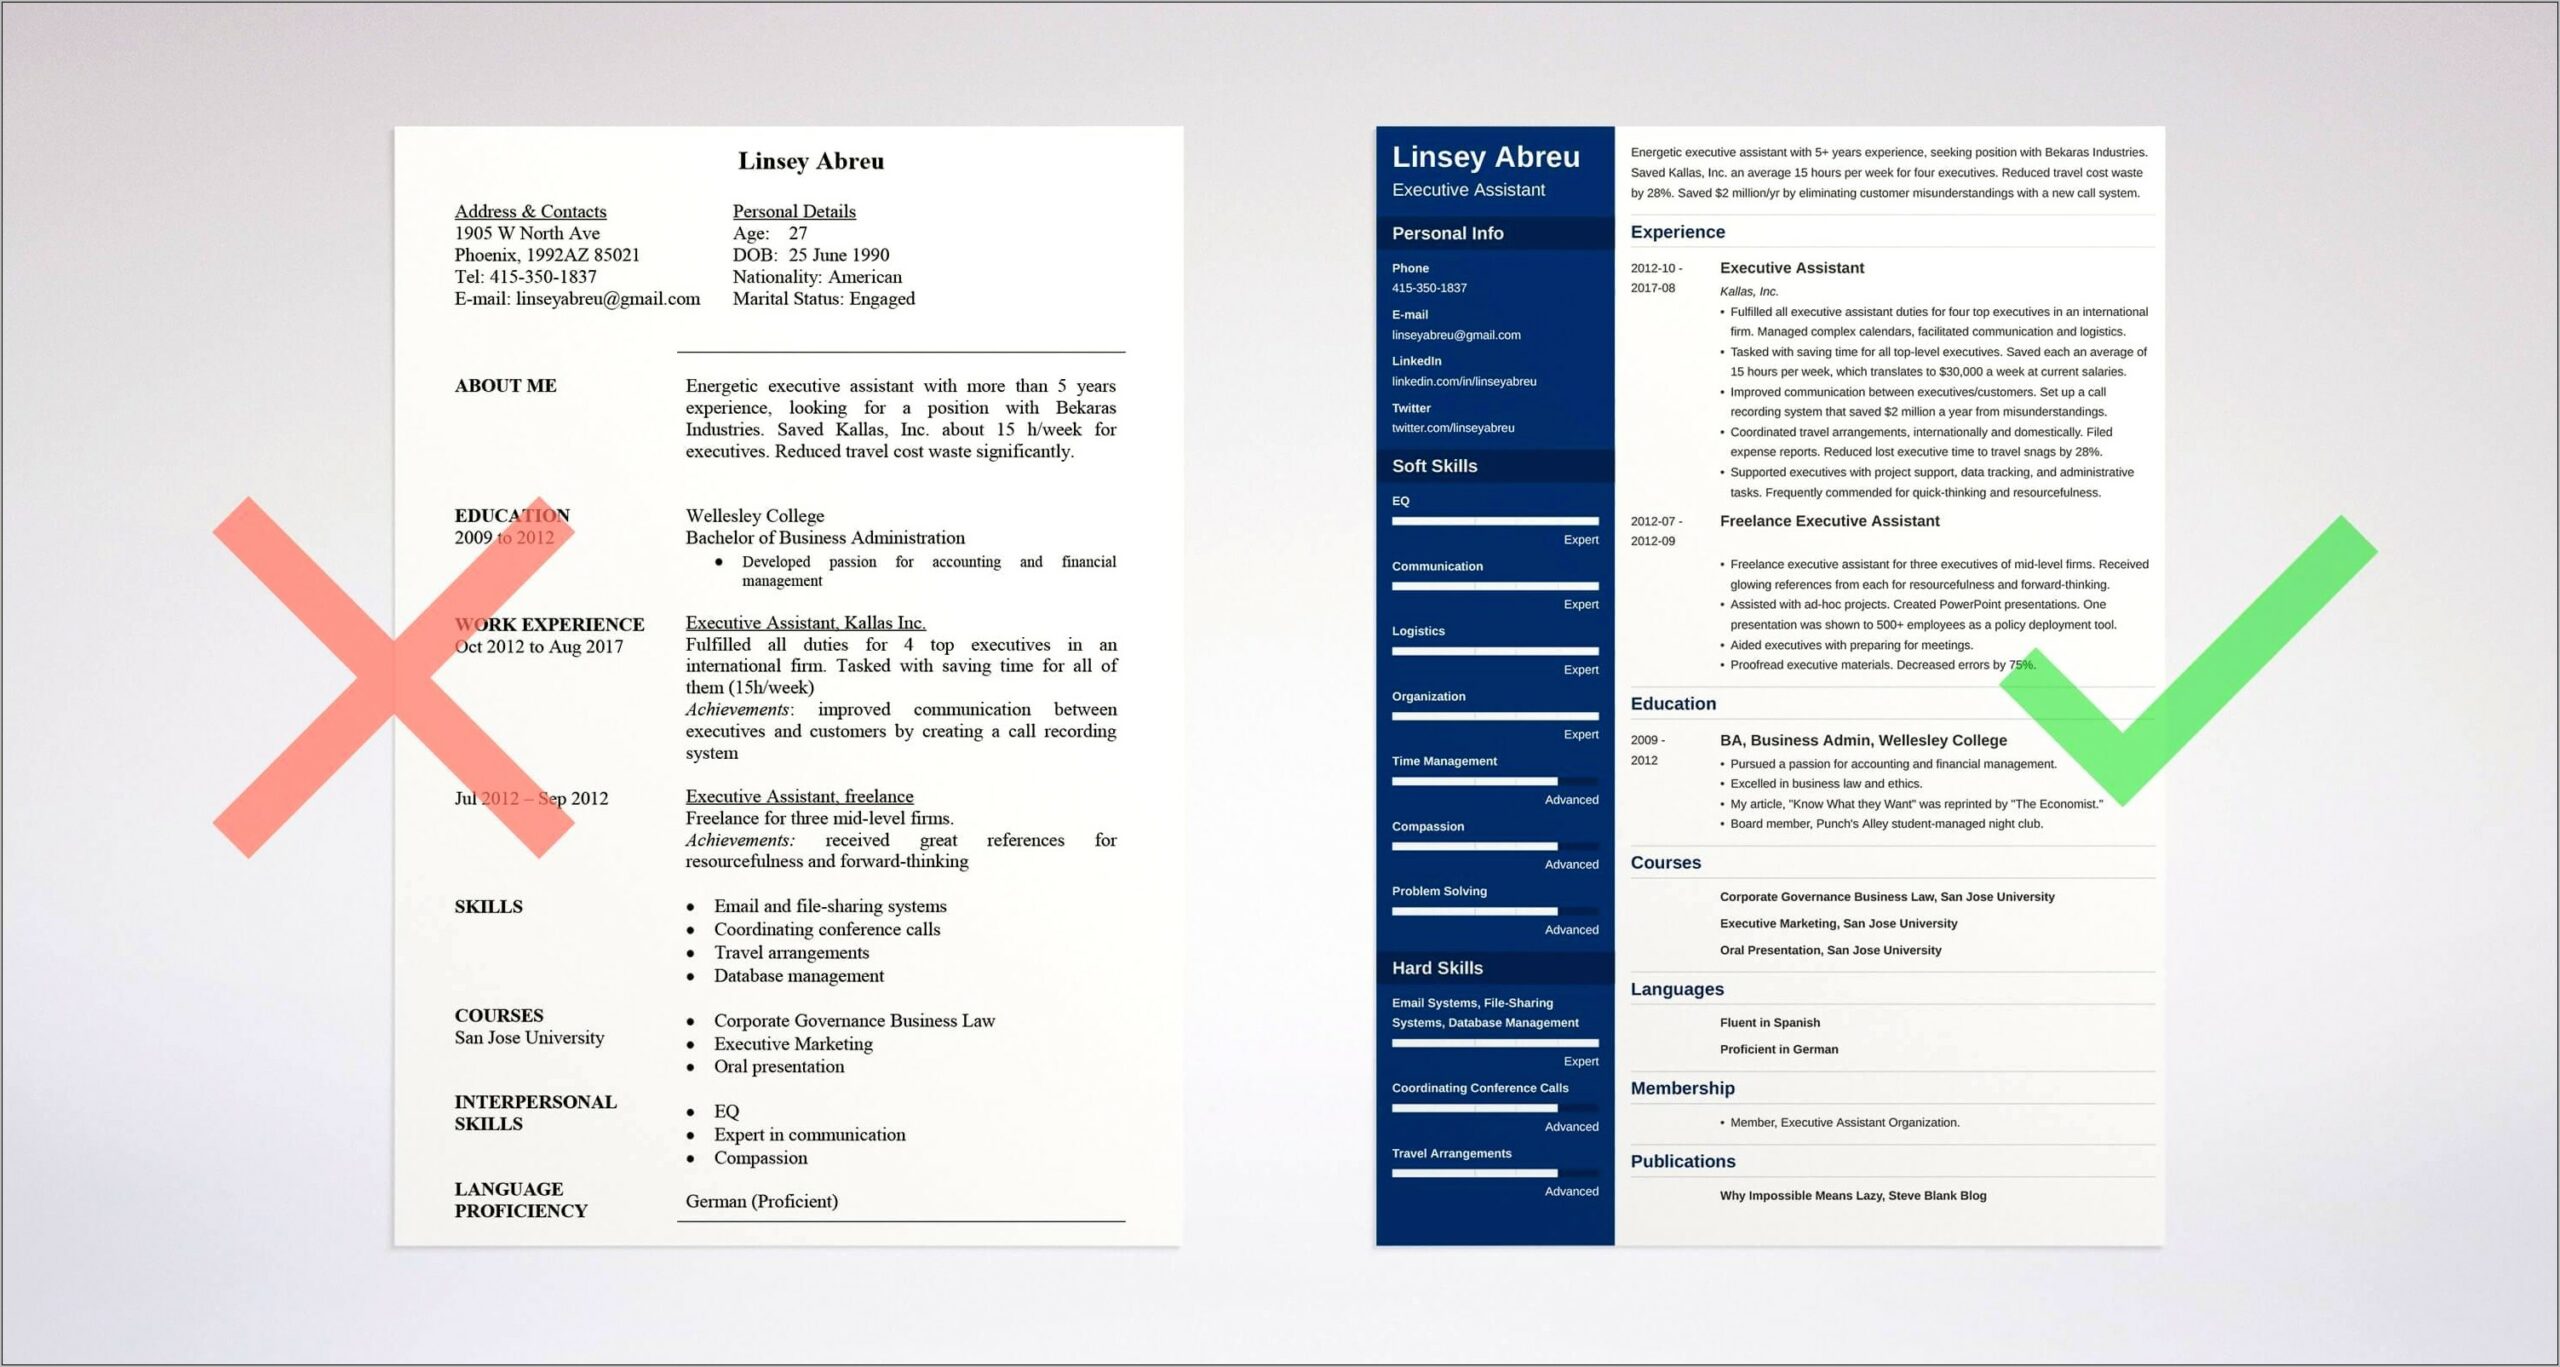 Sample Resume For City Clerk Executive Assistant